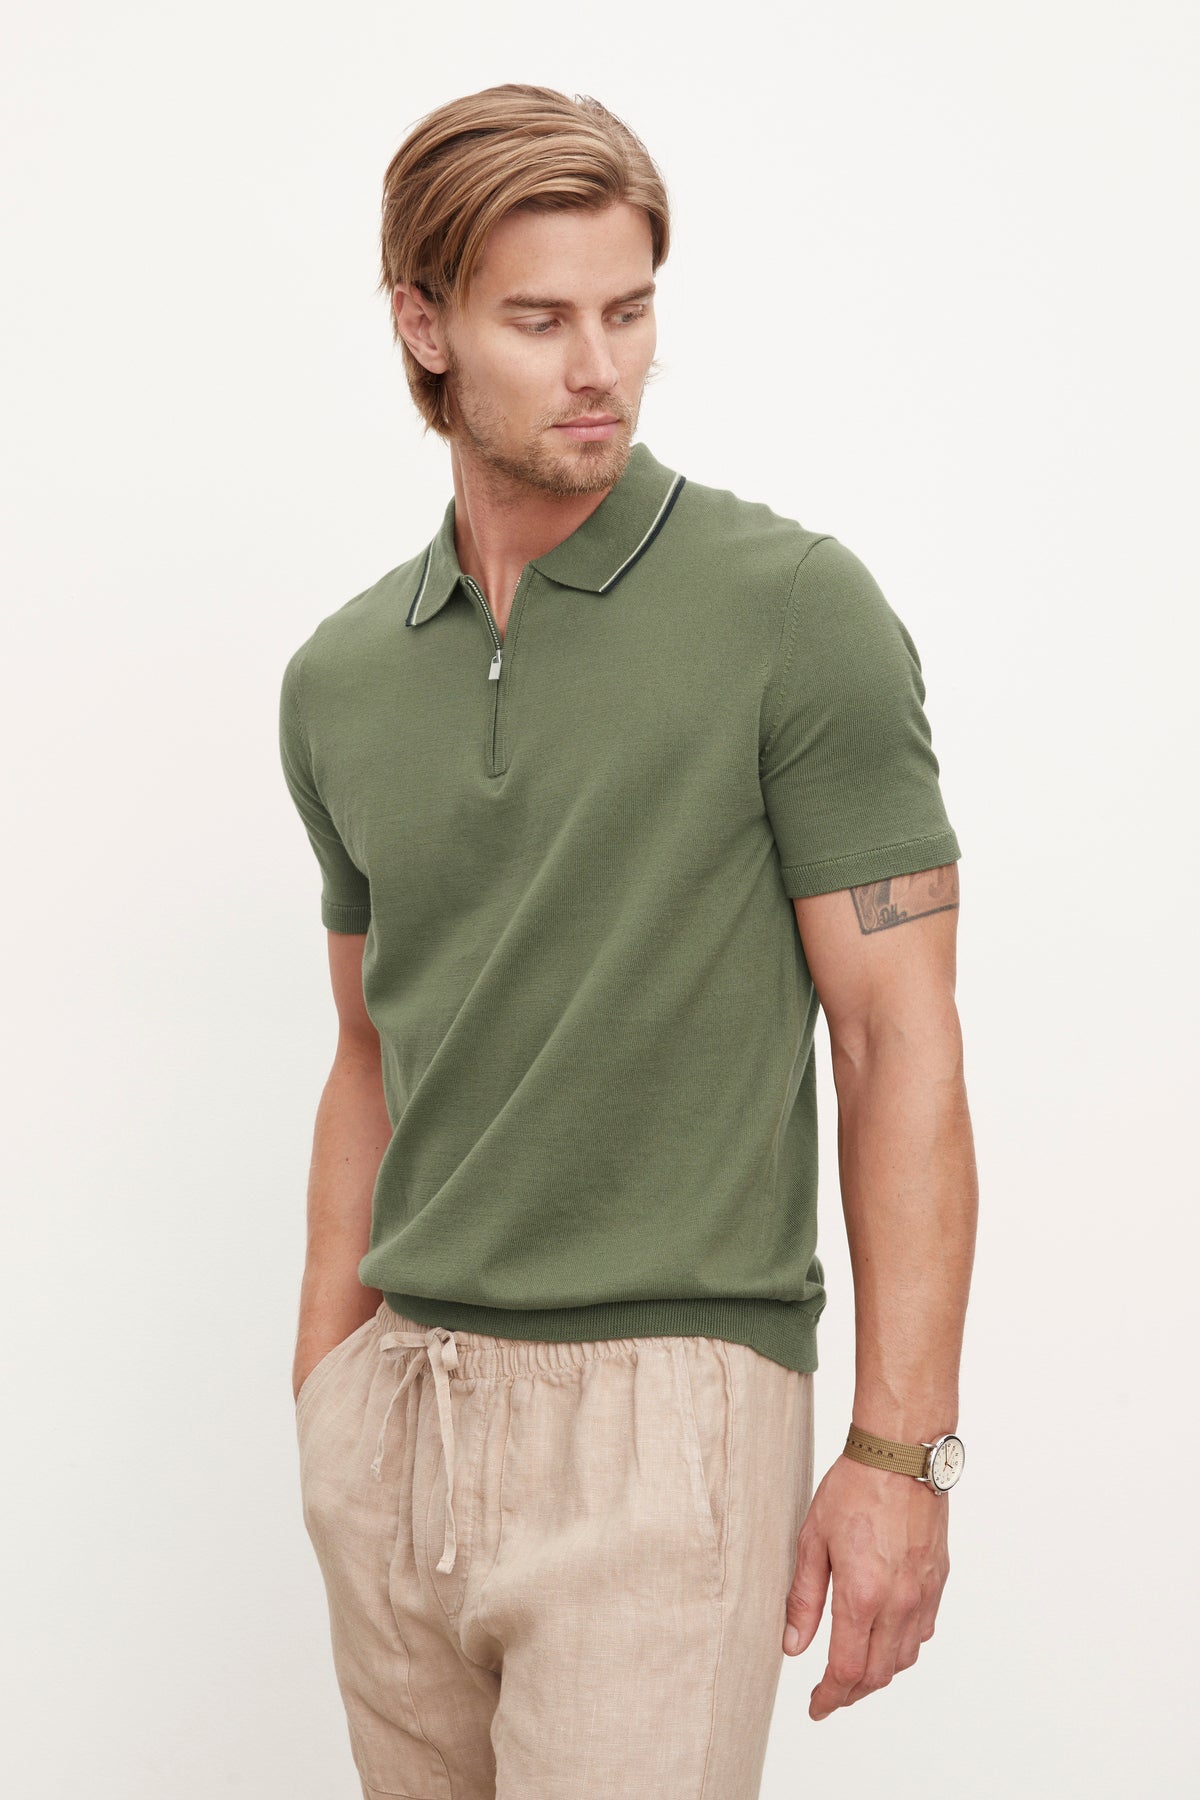   The model is wearing a green OTTO ZIP POLO shirt and tan pants. 